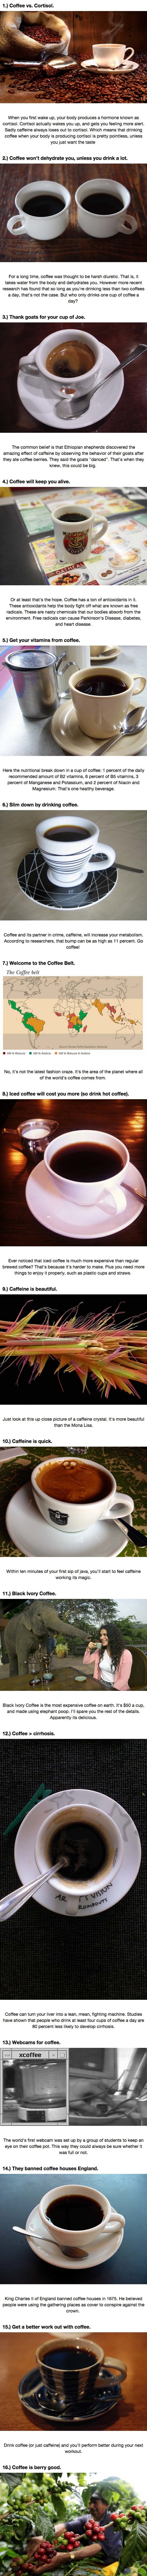 Coffee facts